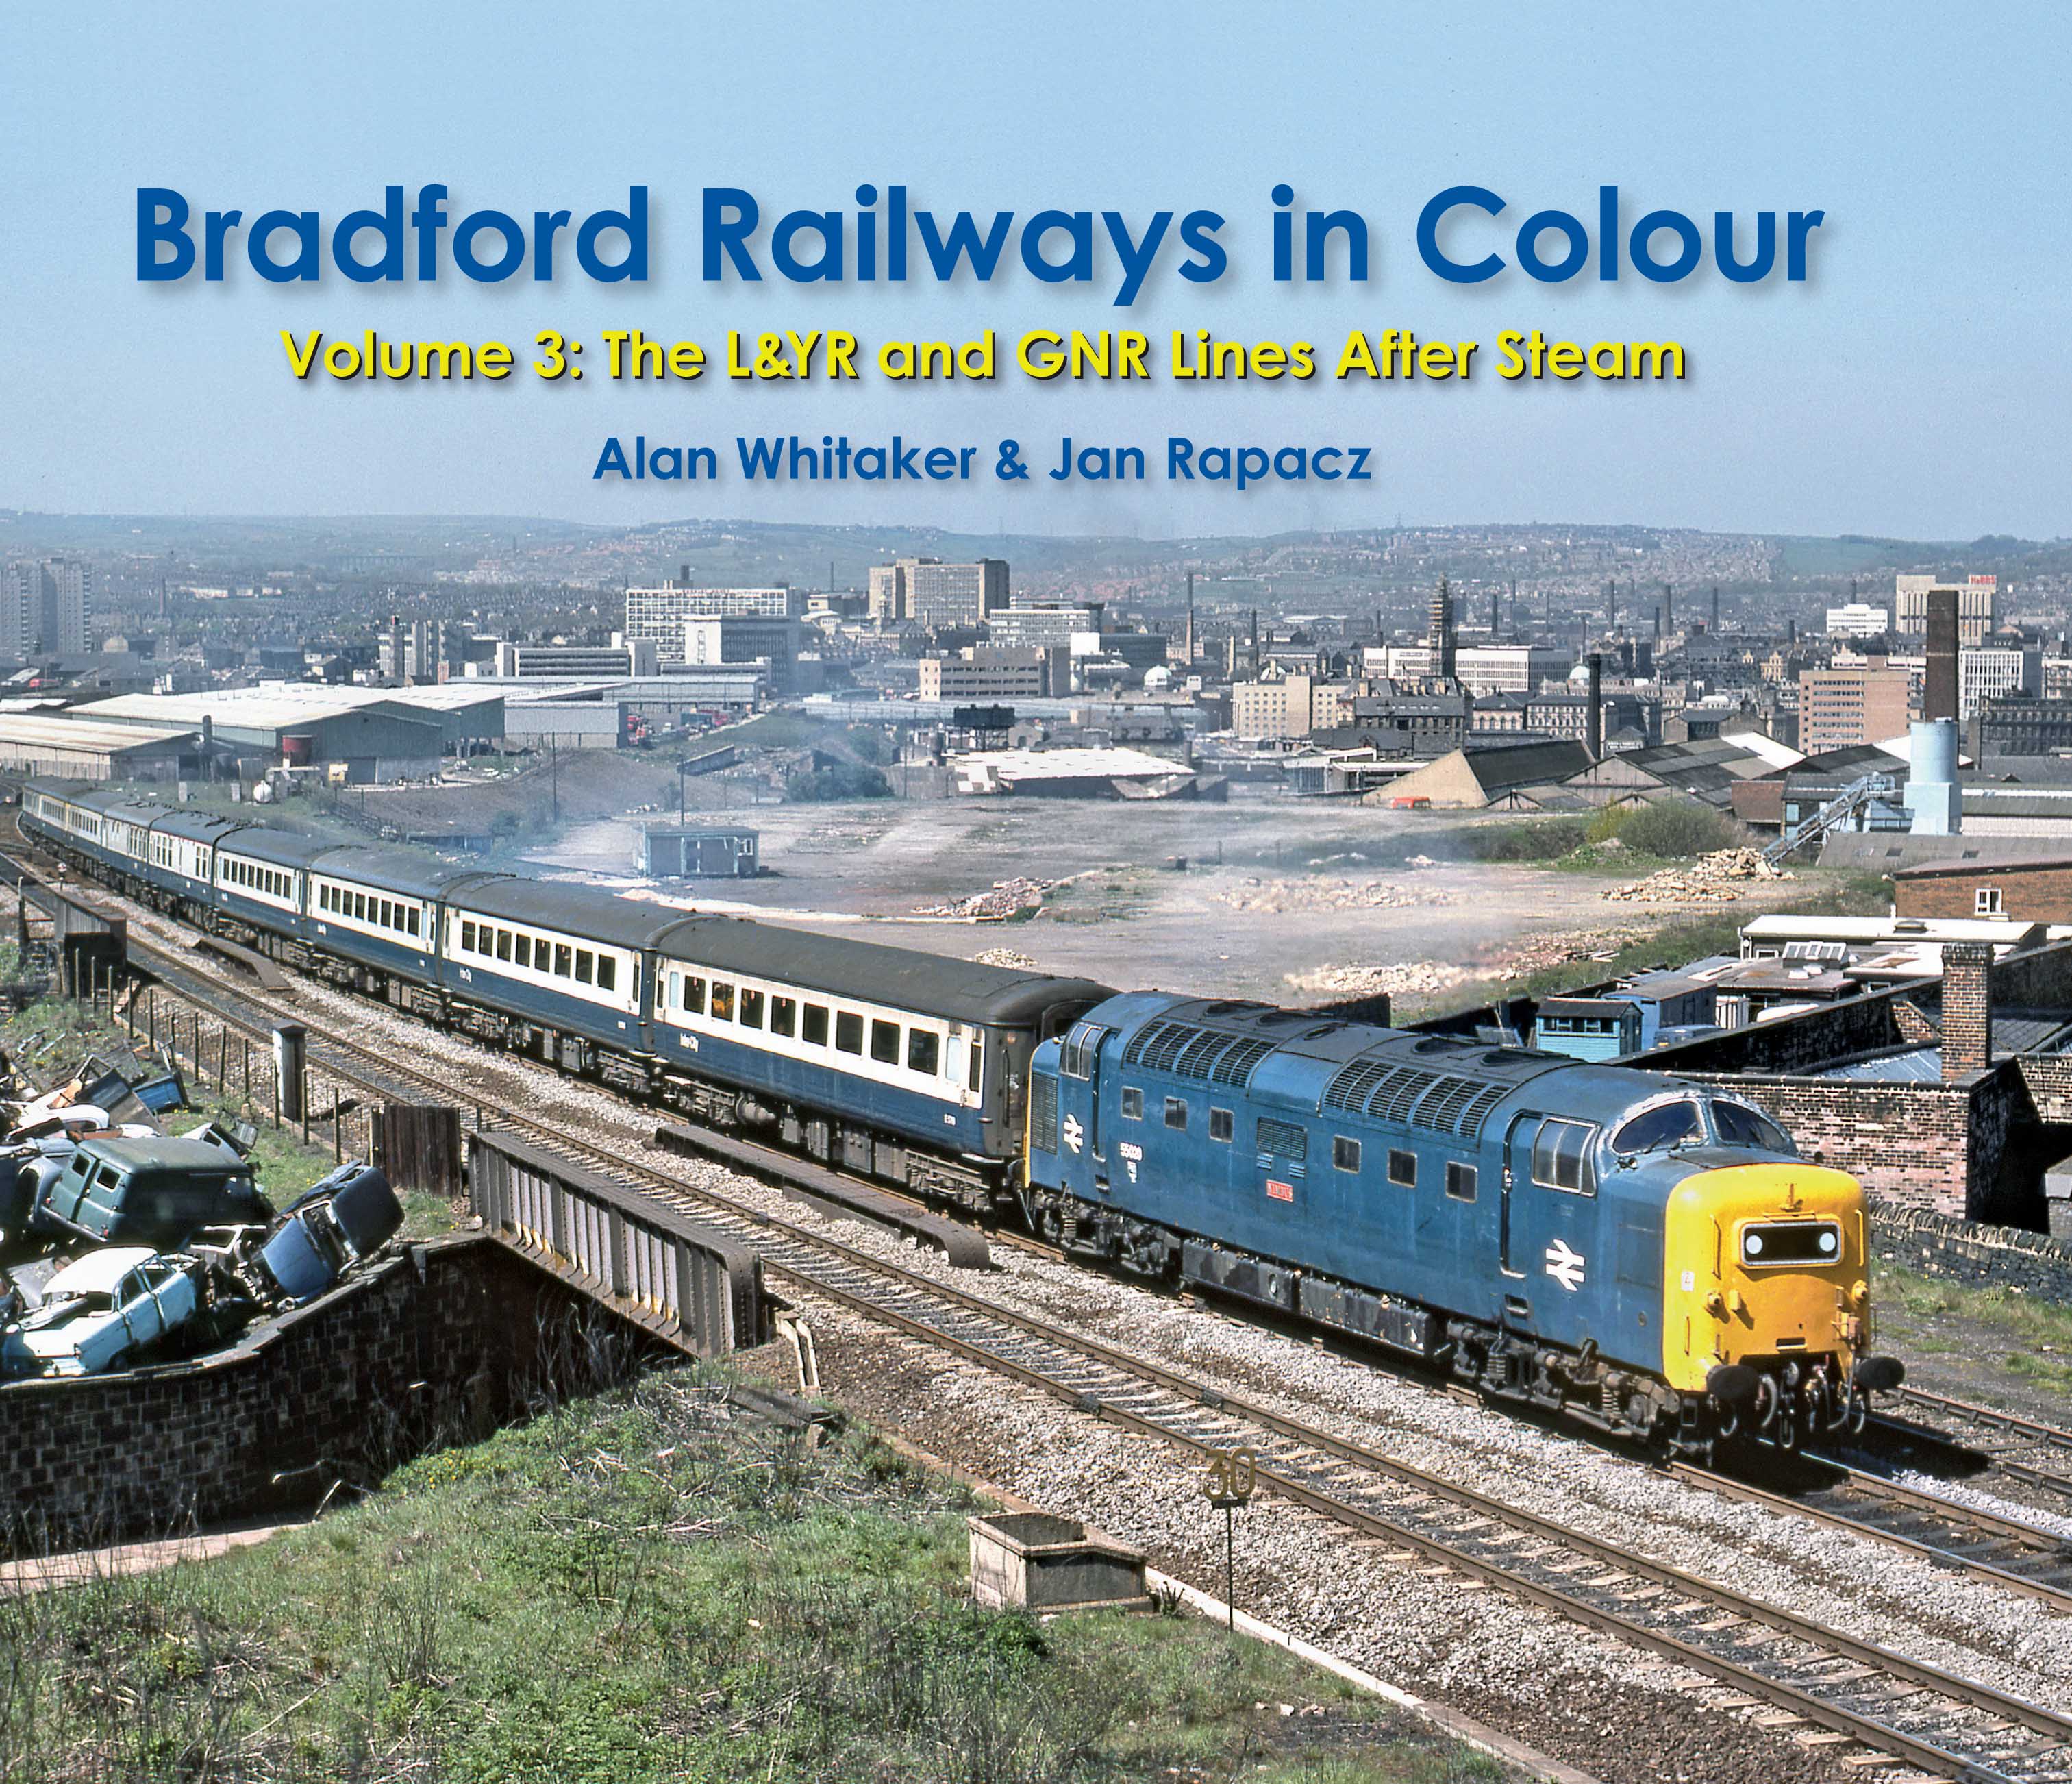 Bradford Railways in Colour Volume 3: The L&YR and GNR Lines After Steam